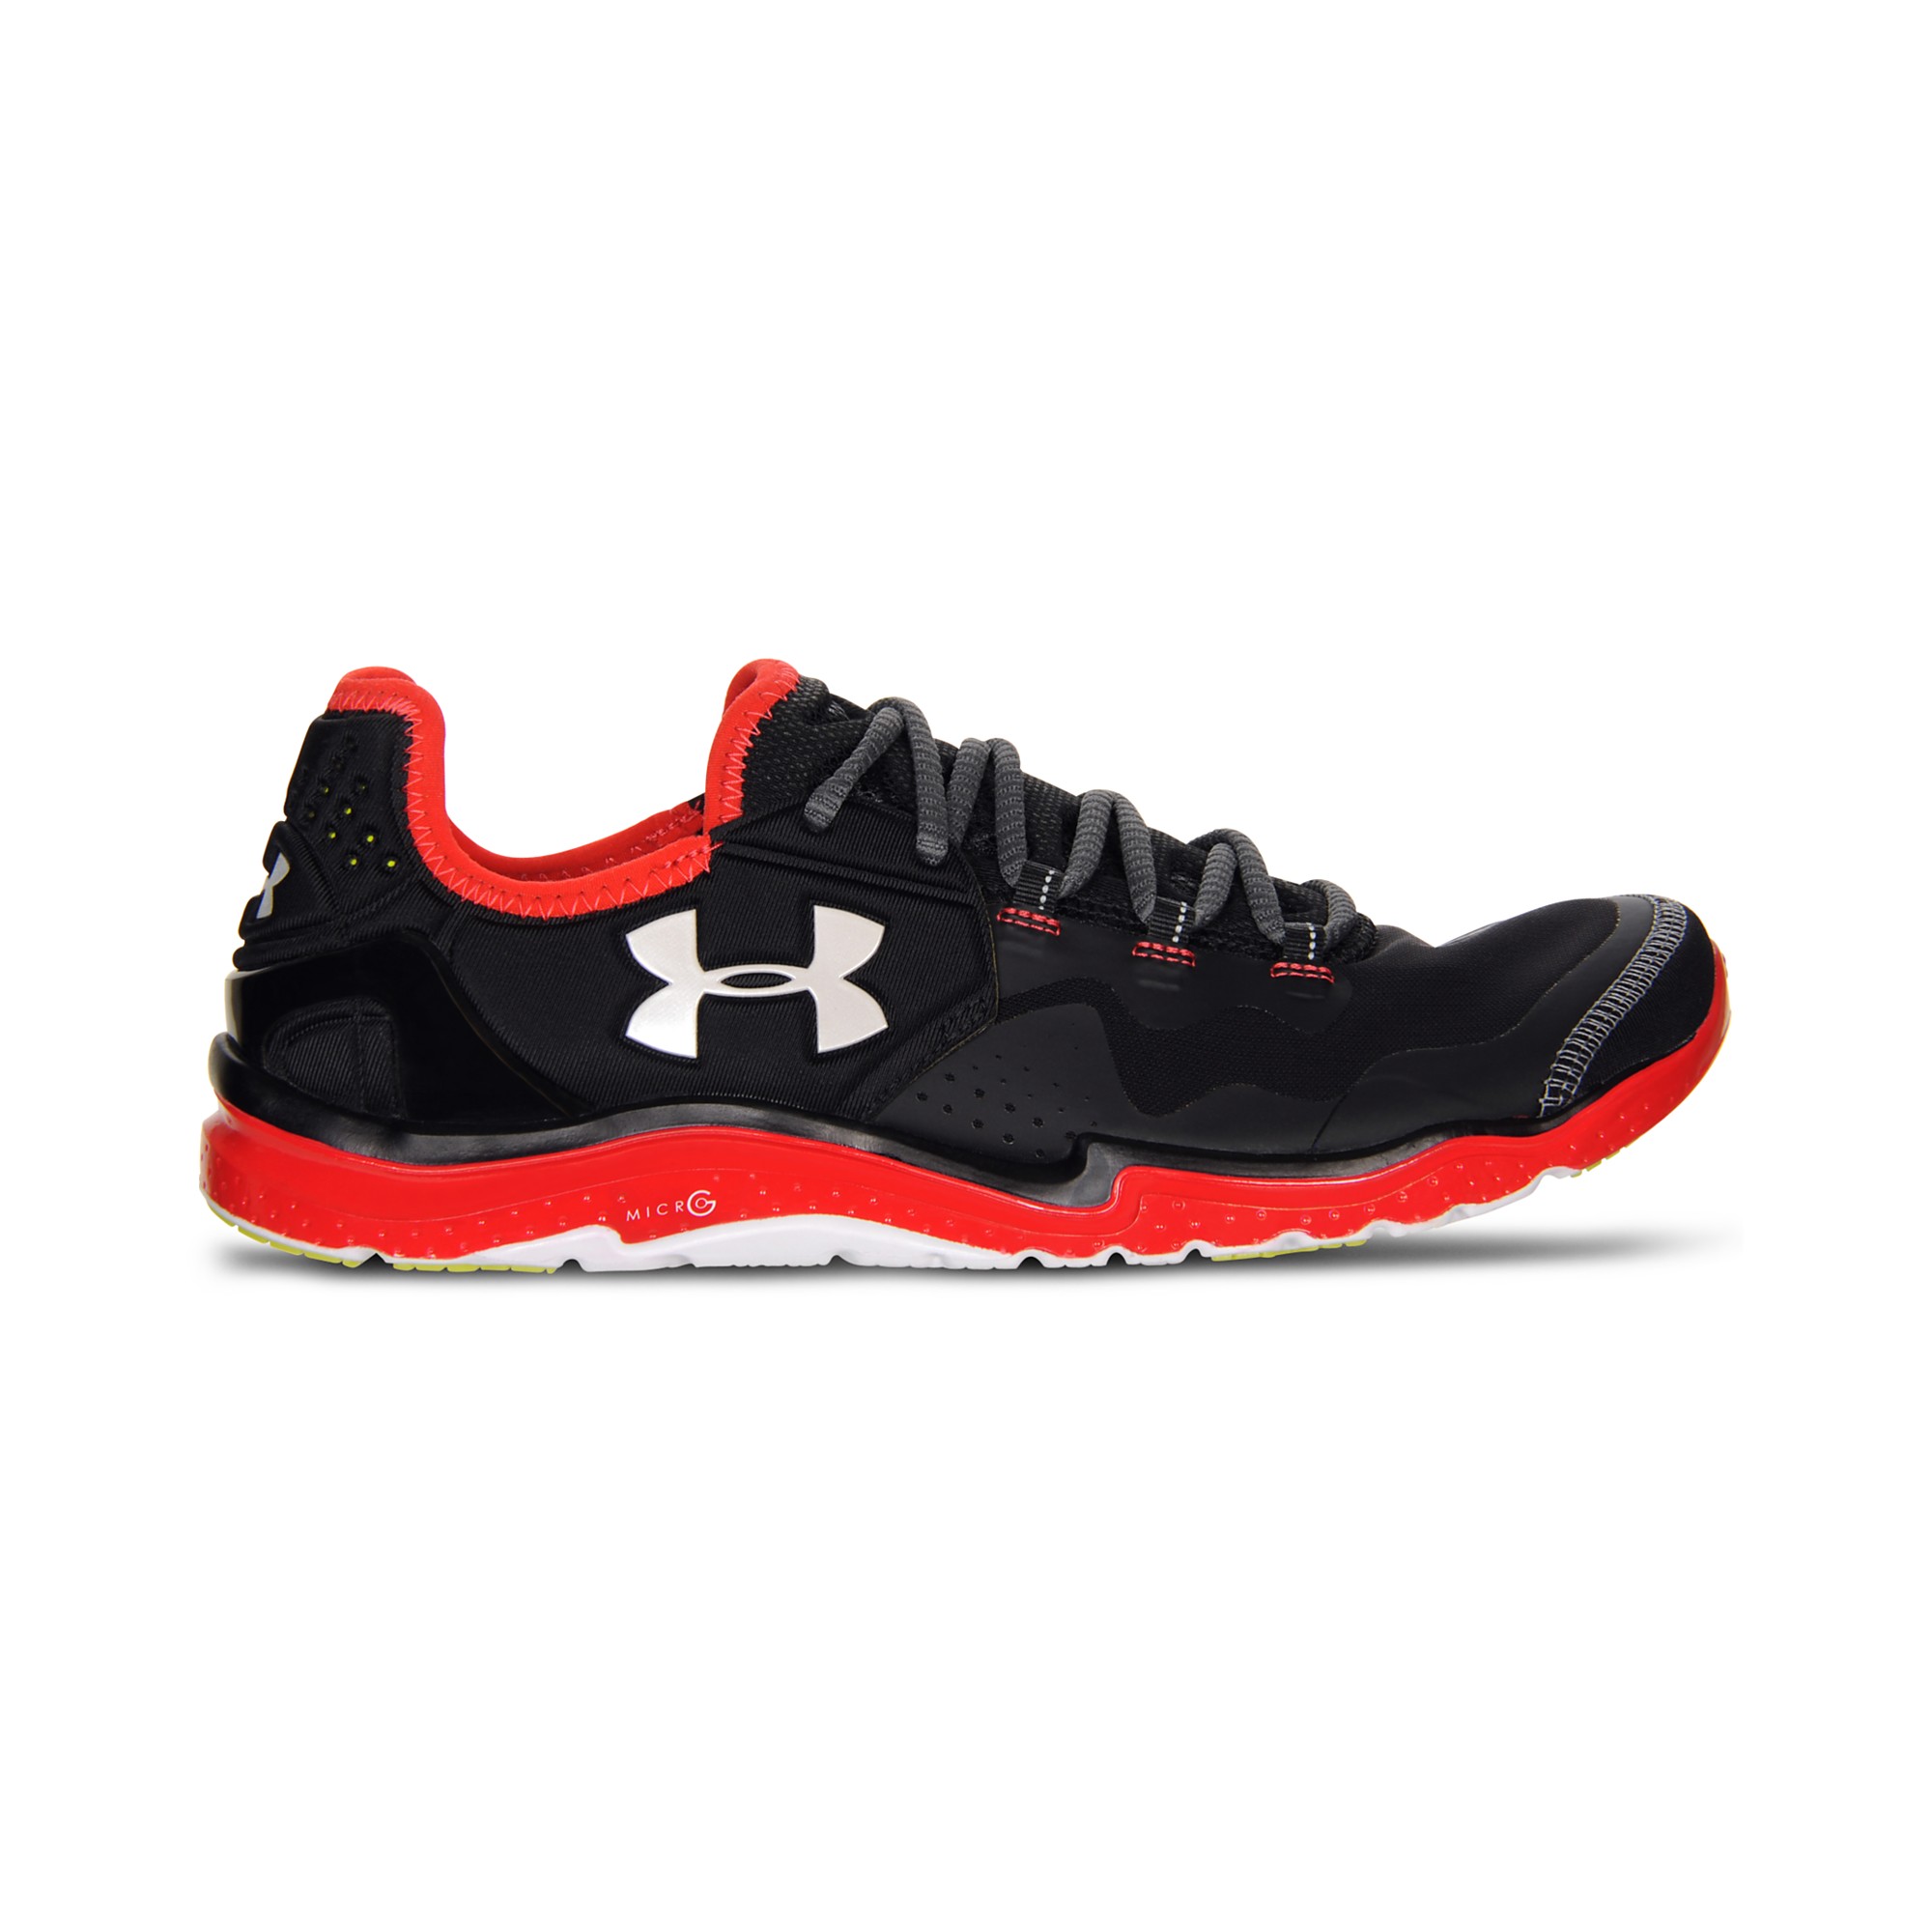 Under Armour Charge Rc 2 Running Sneakers in Black/Red/White (Black ...